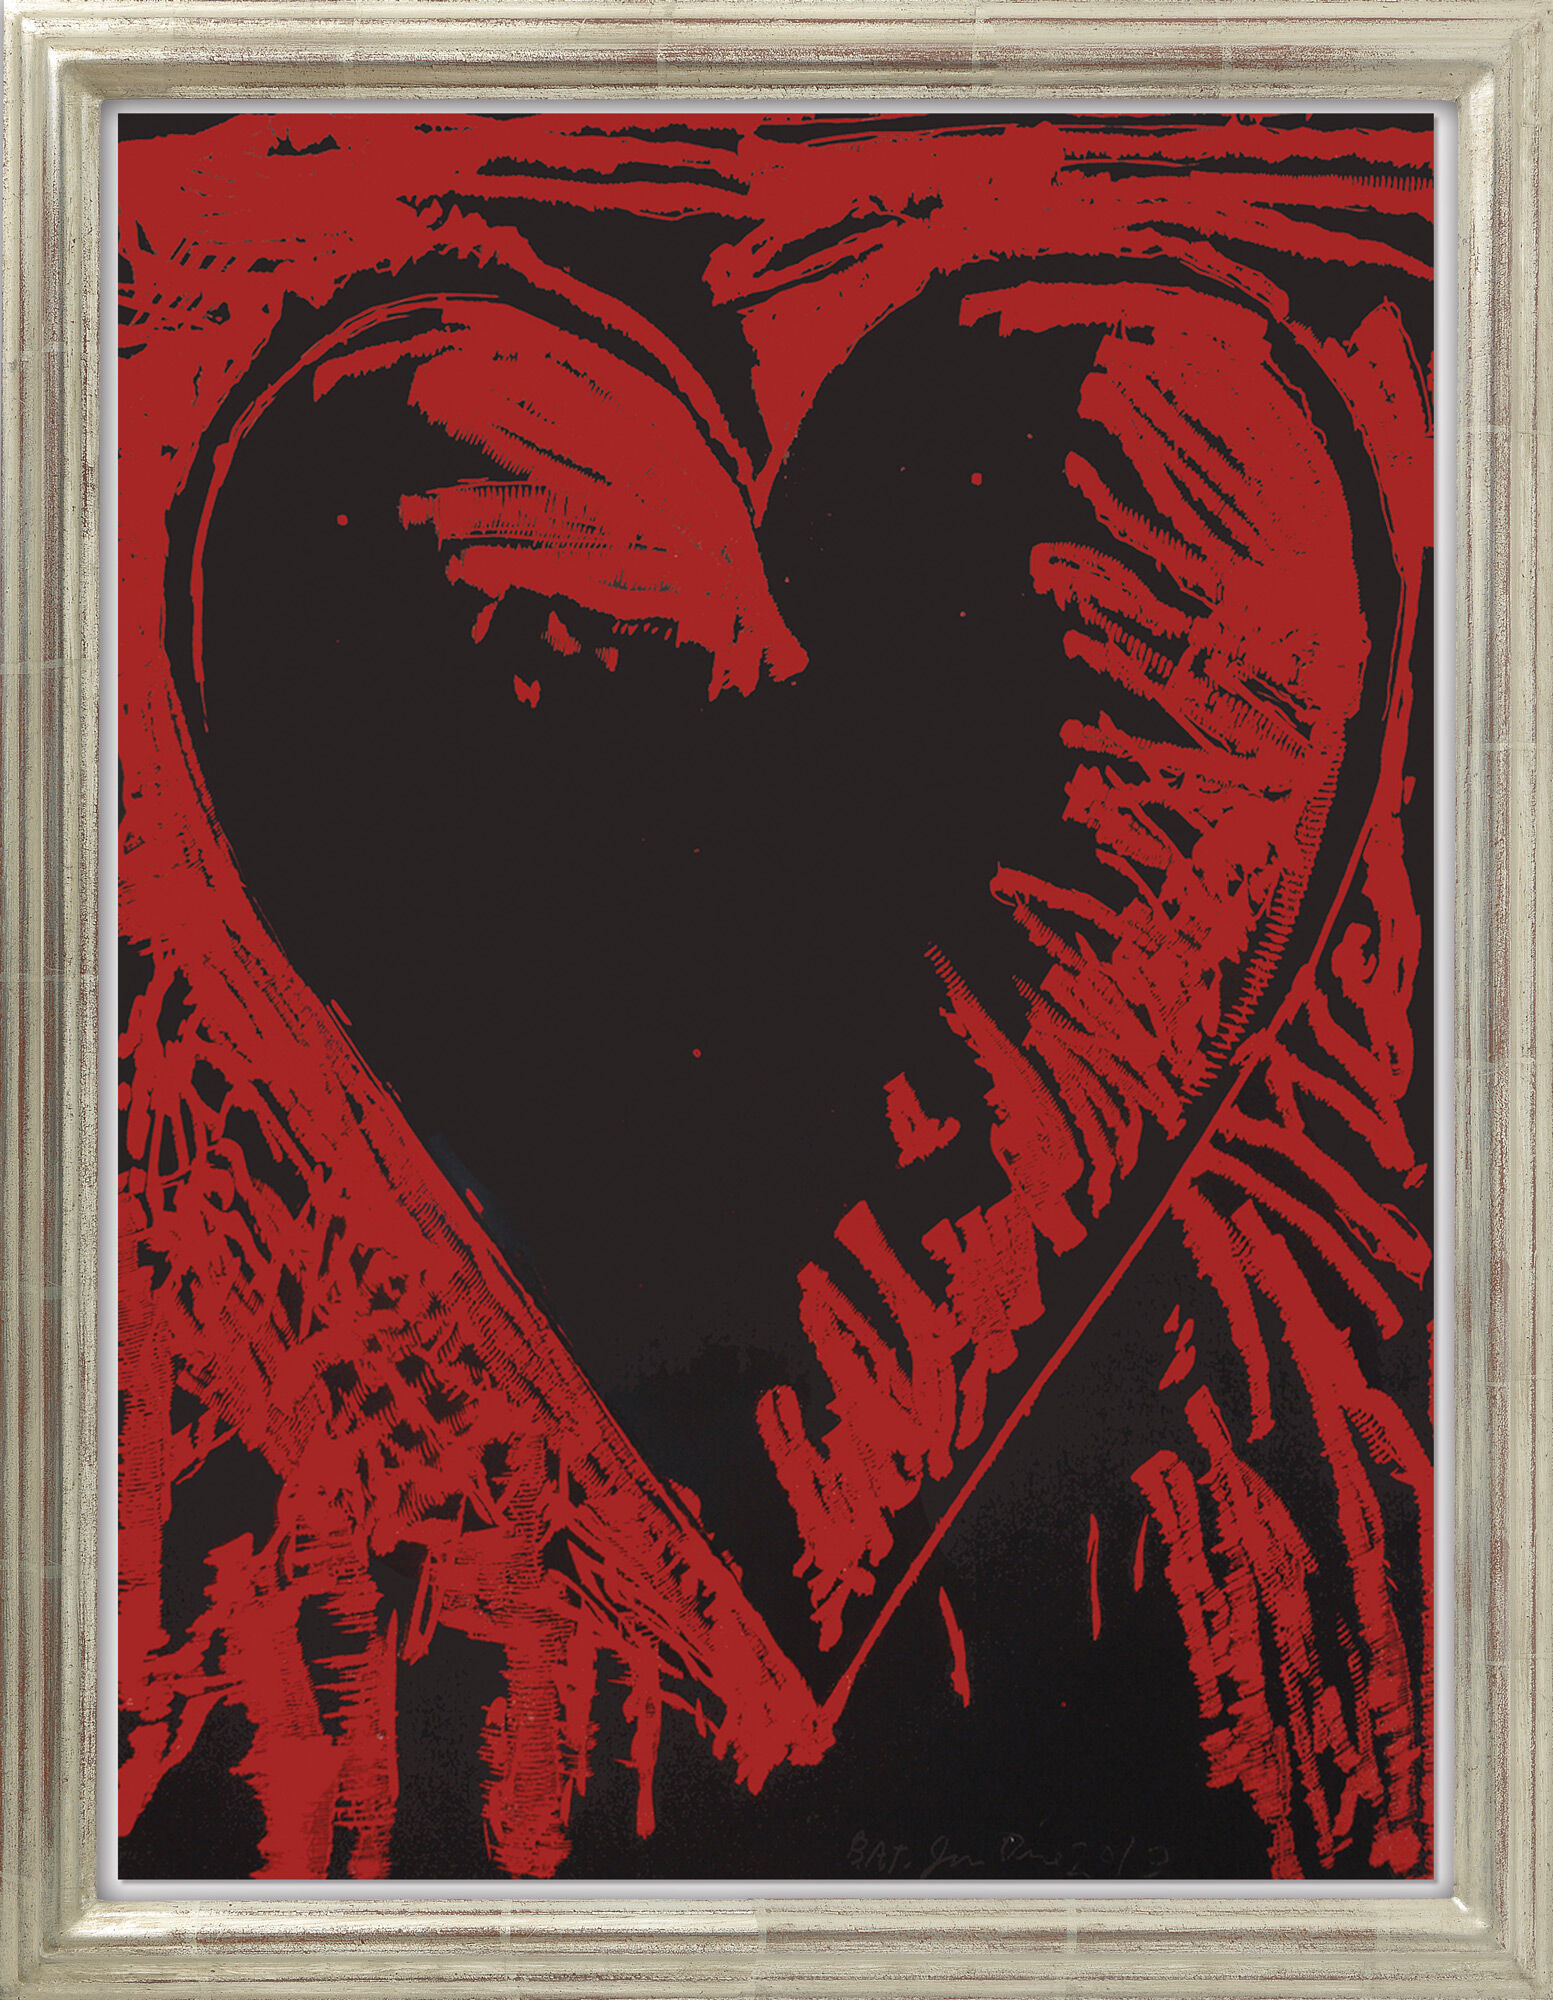 Picture "The Black and Red Heart" (2013) by Jim Dine